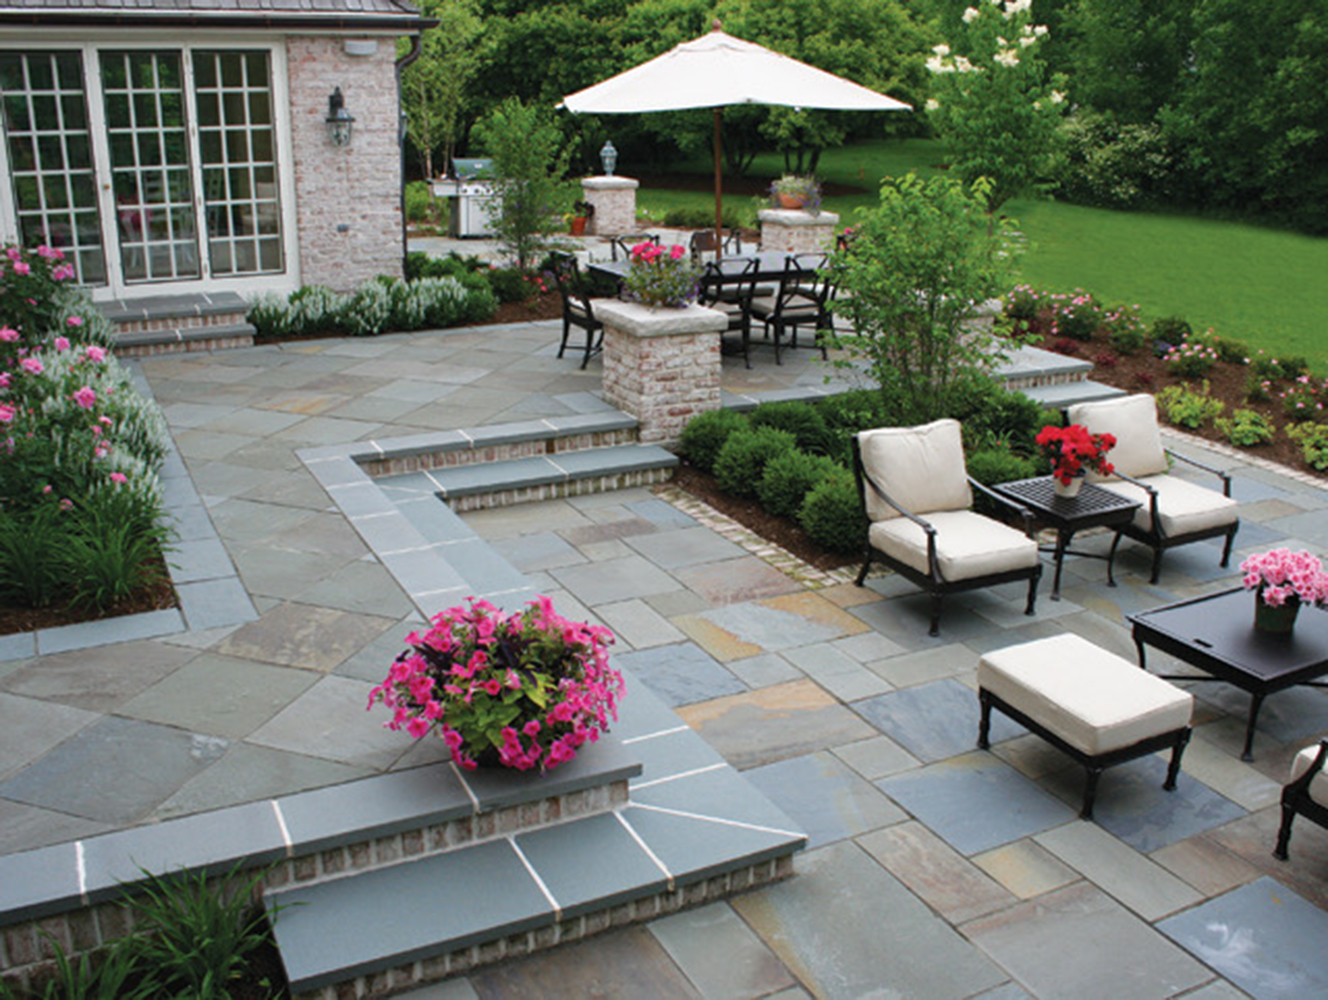 Patio builders design patios that suit both modern and classic tastes.